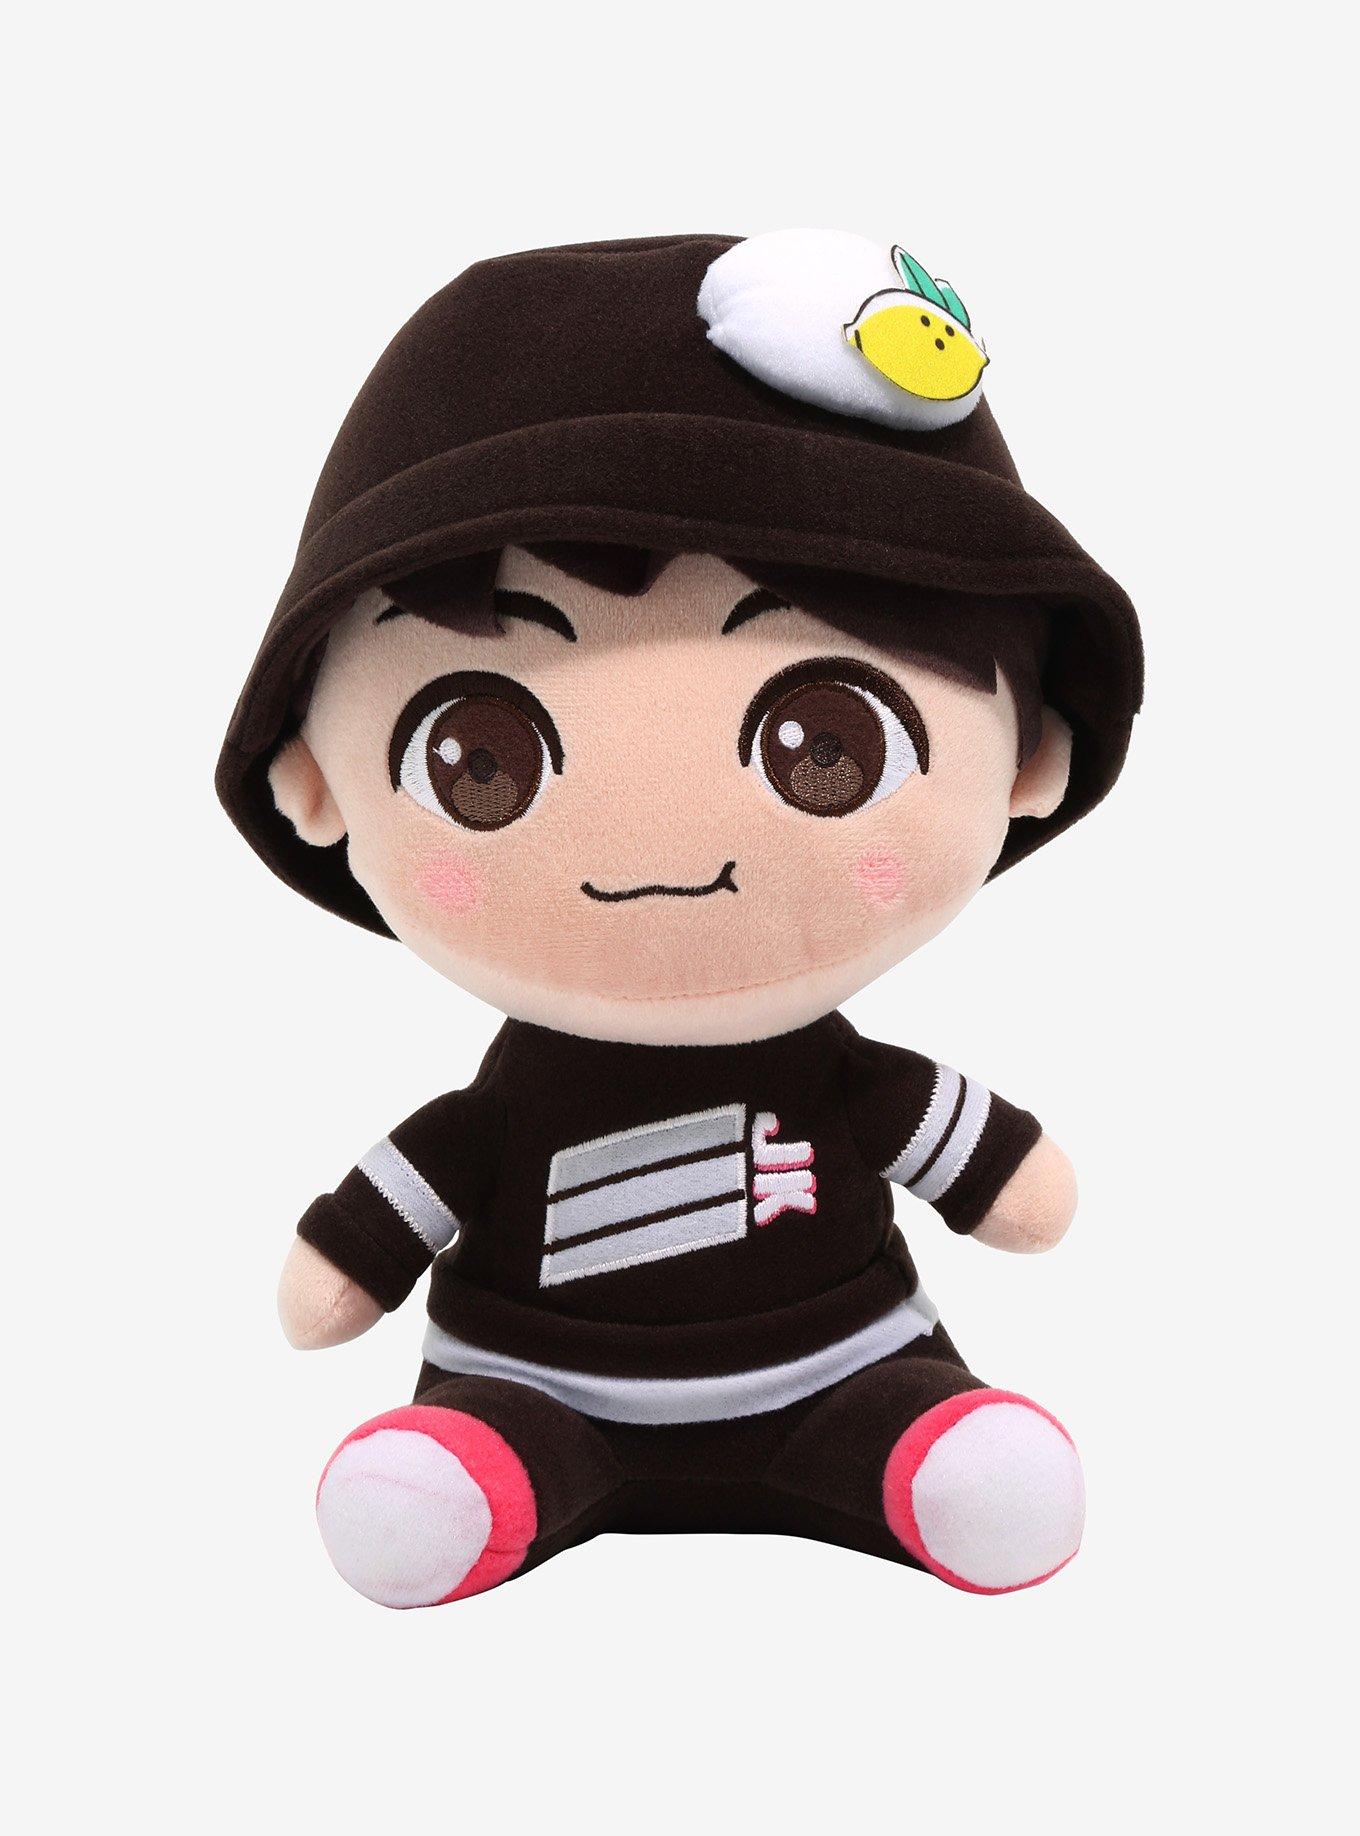 TinyTAN Sweet Time Jung Kook Plush Inspired By BTS